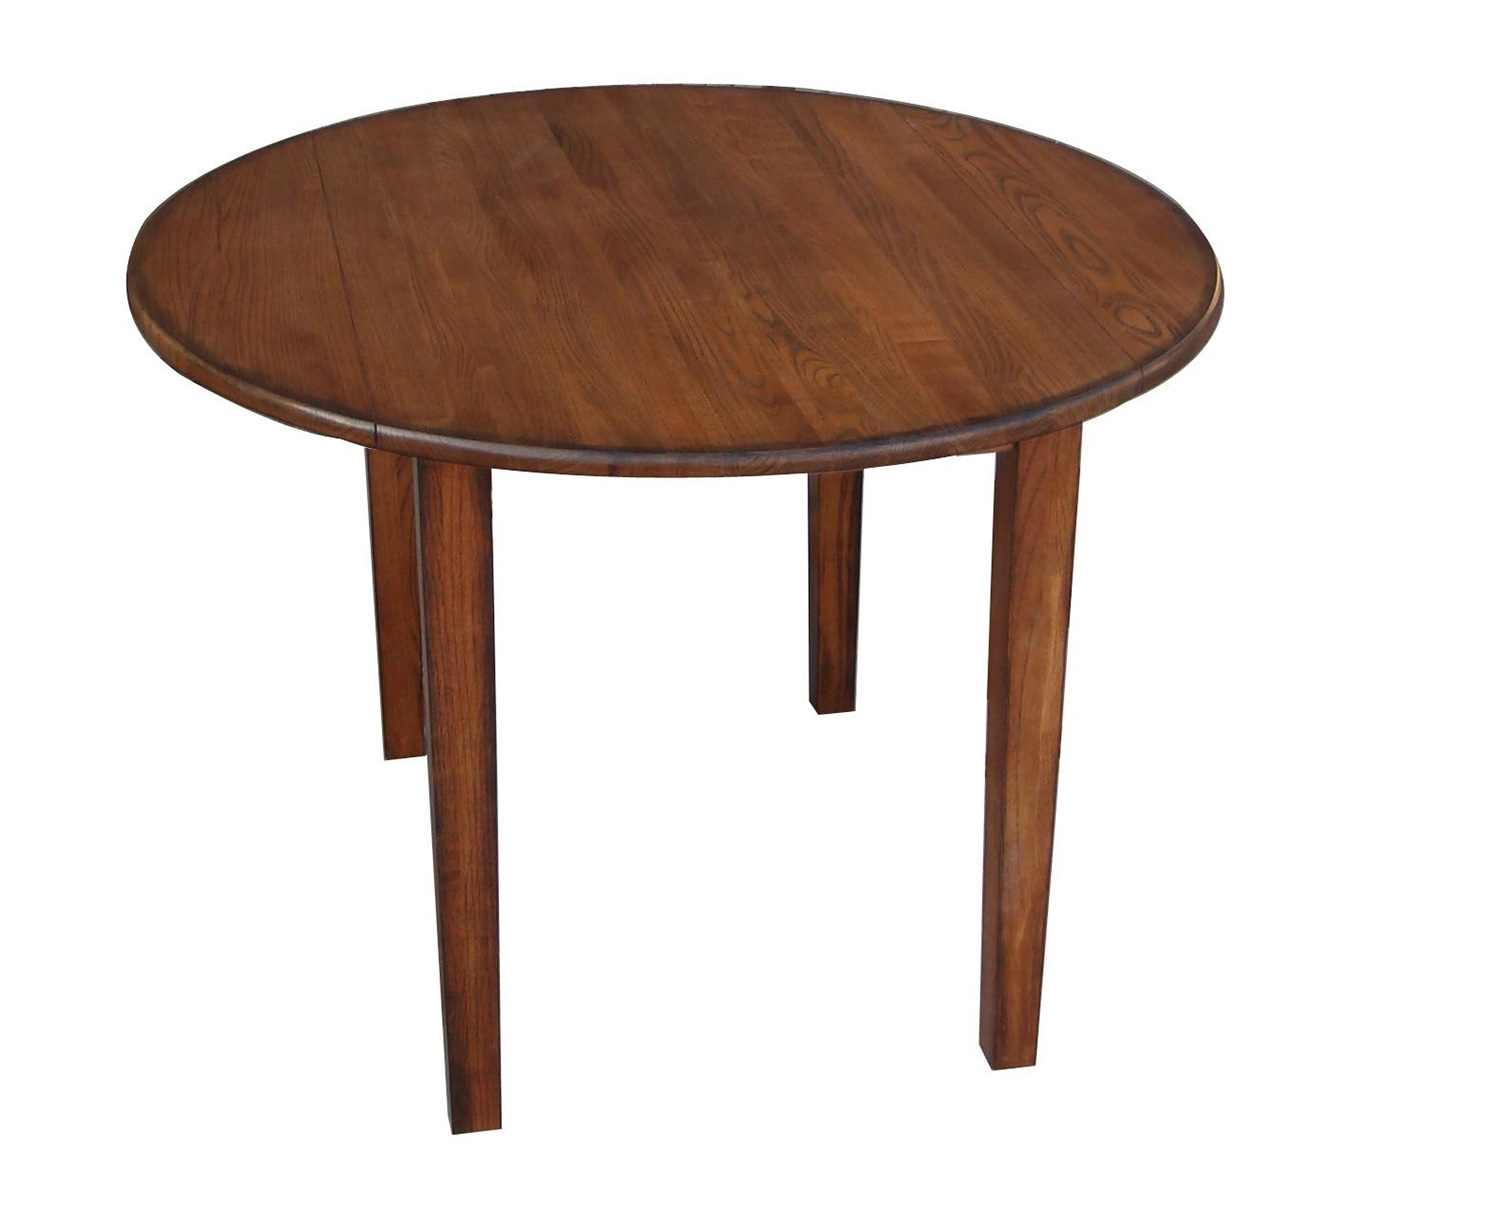 Chelsea Home Fruitwood Table - Burnished Walnut